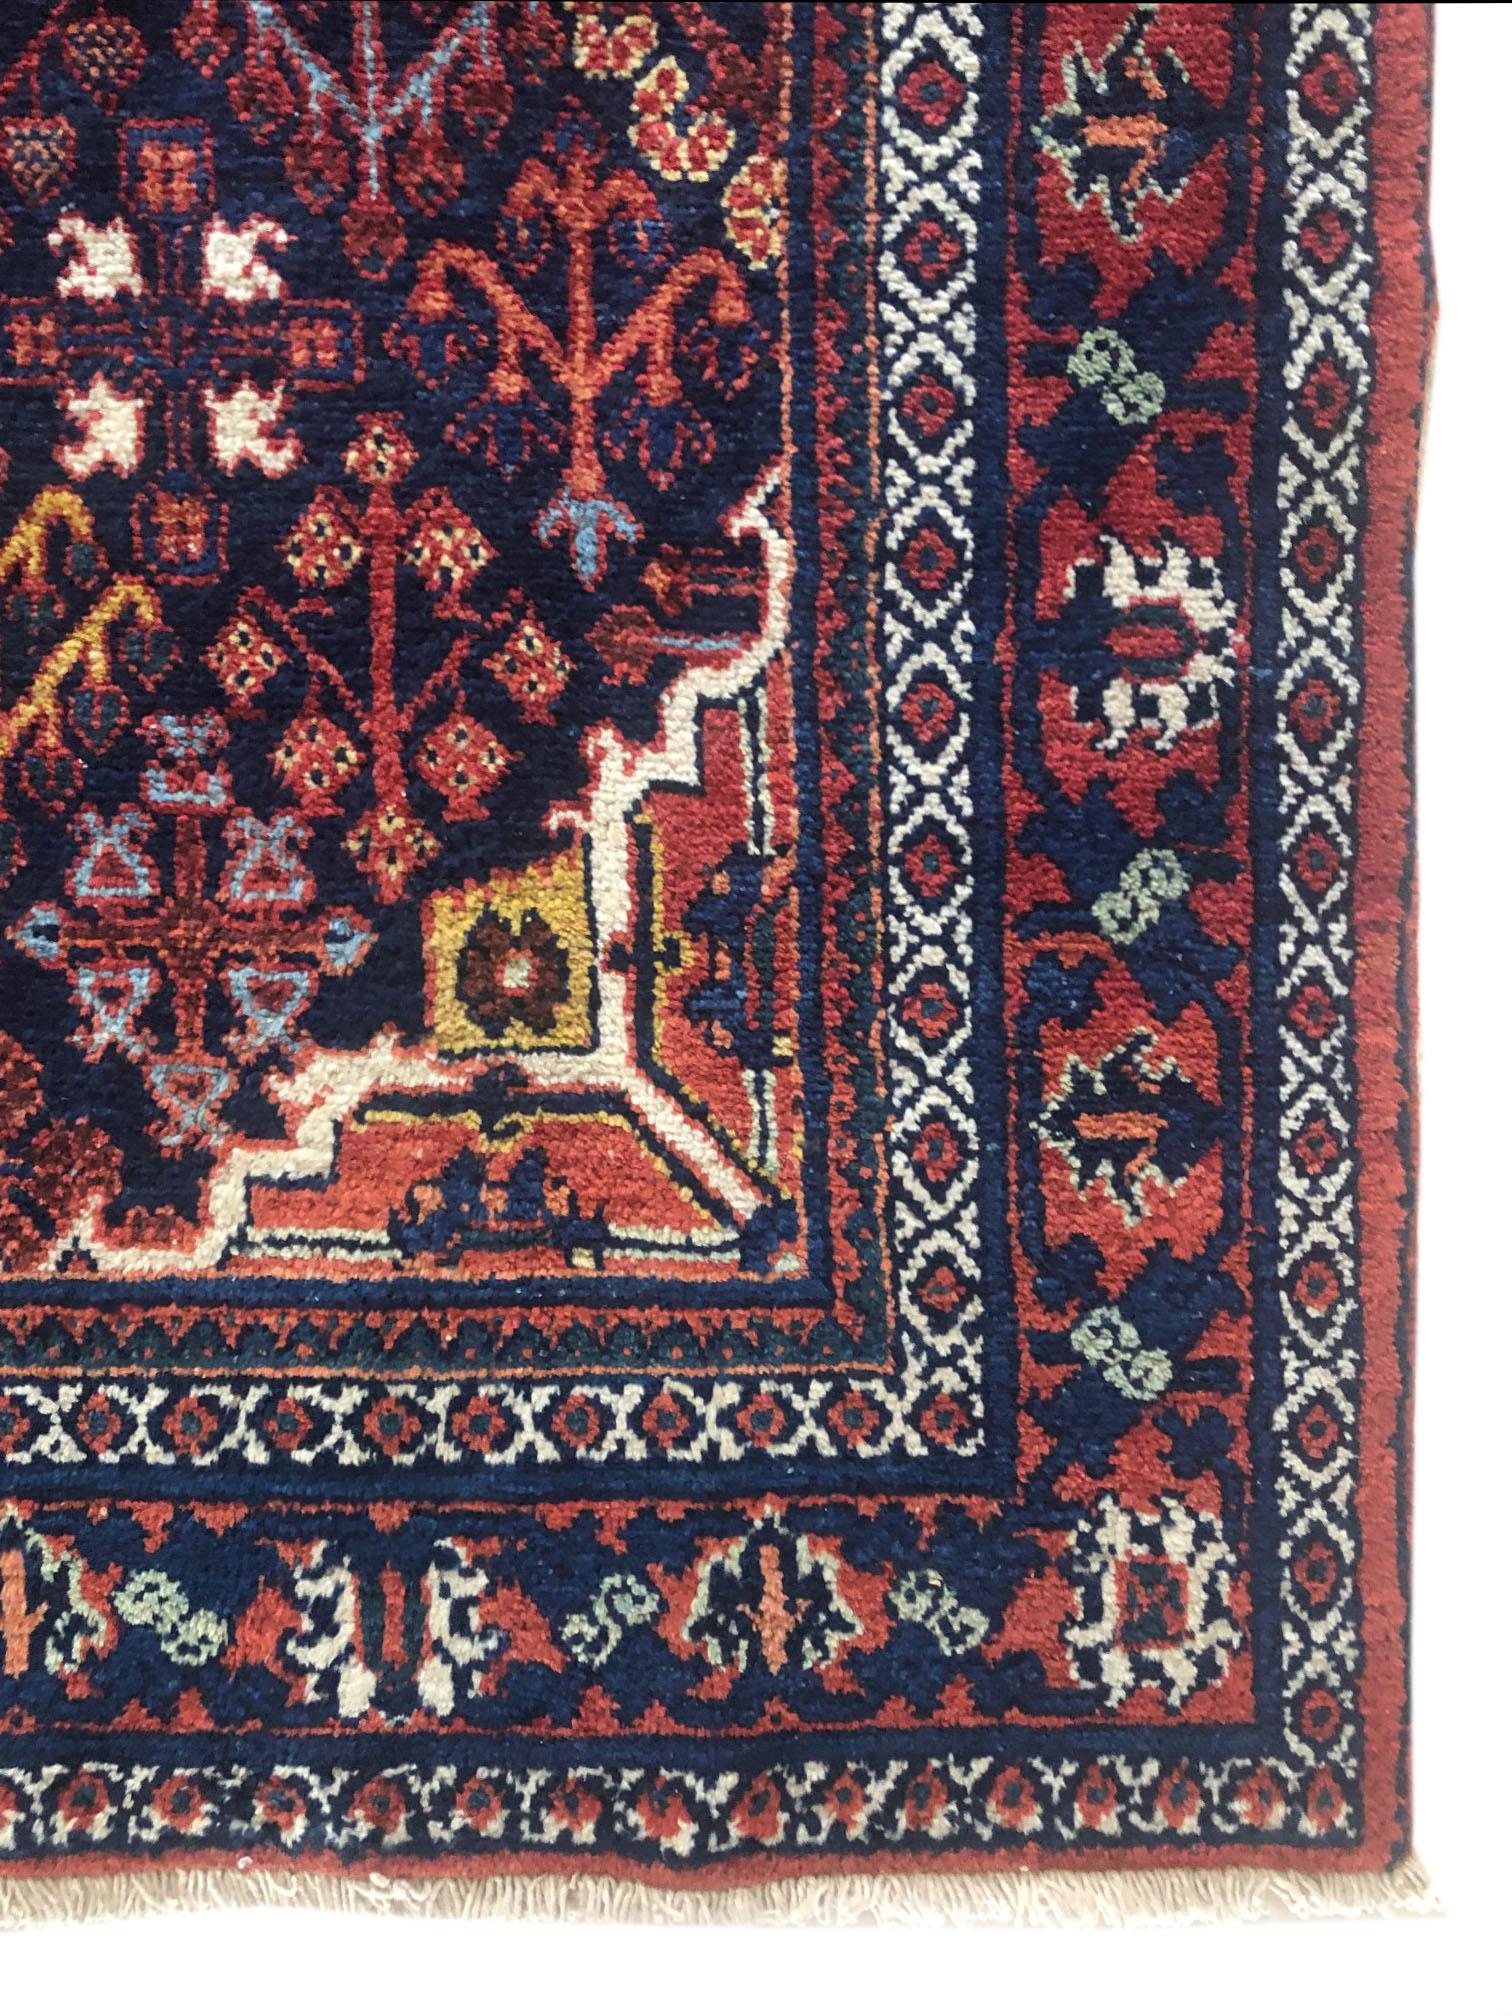 Persian Hand Knotted Tribal Diamond Medallion Josheghan (Joshaghan) Rug 1960 In Good Condition For Sale In San Diego, CA